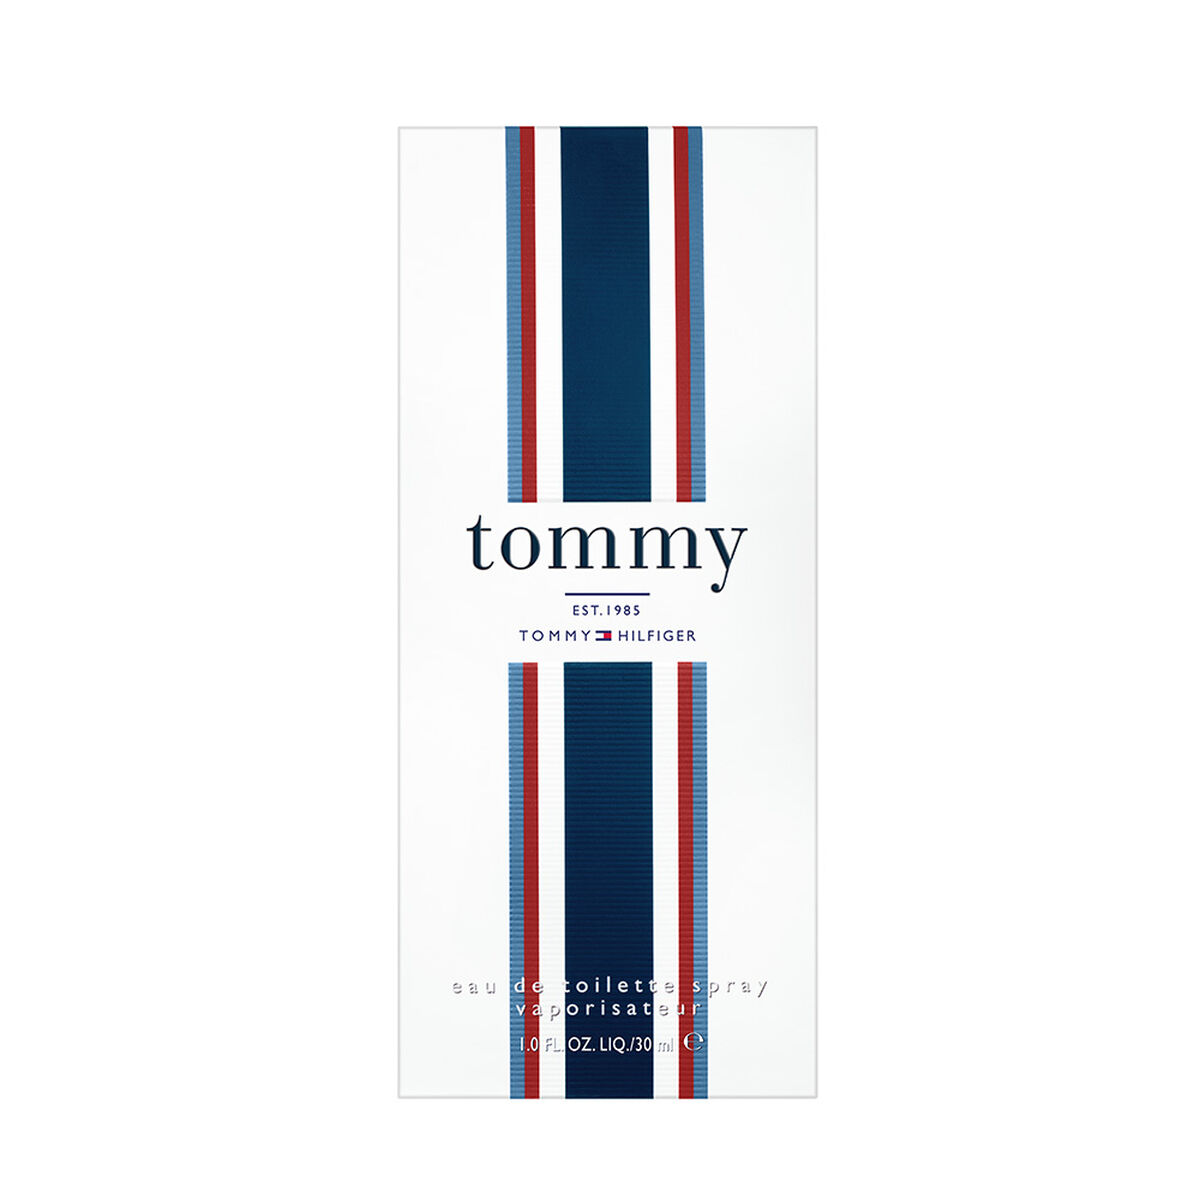 Perfume Hombre Tommy EDT 30 ml